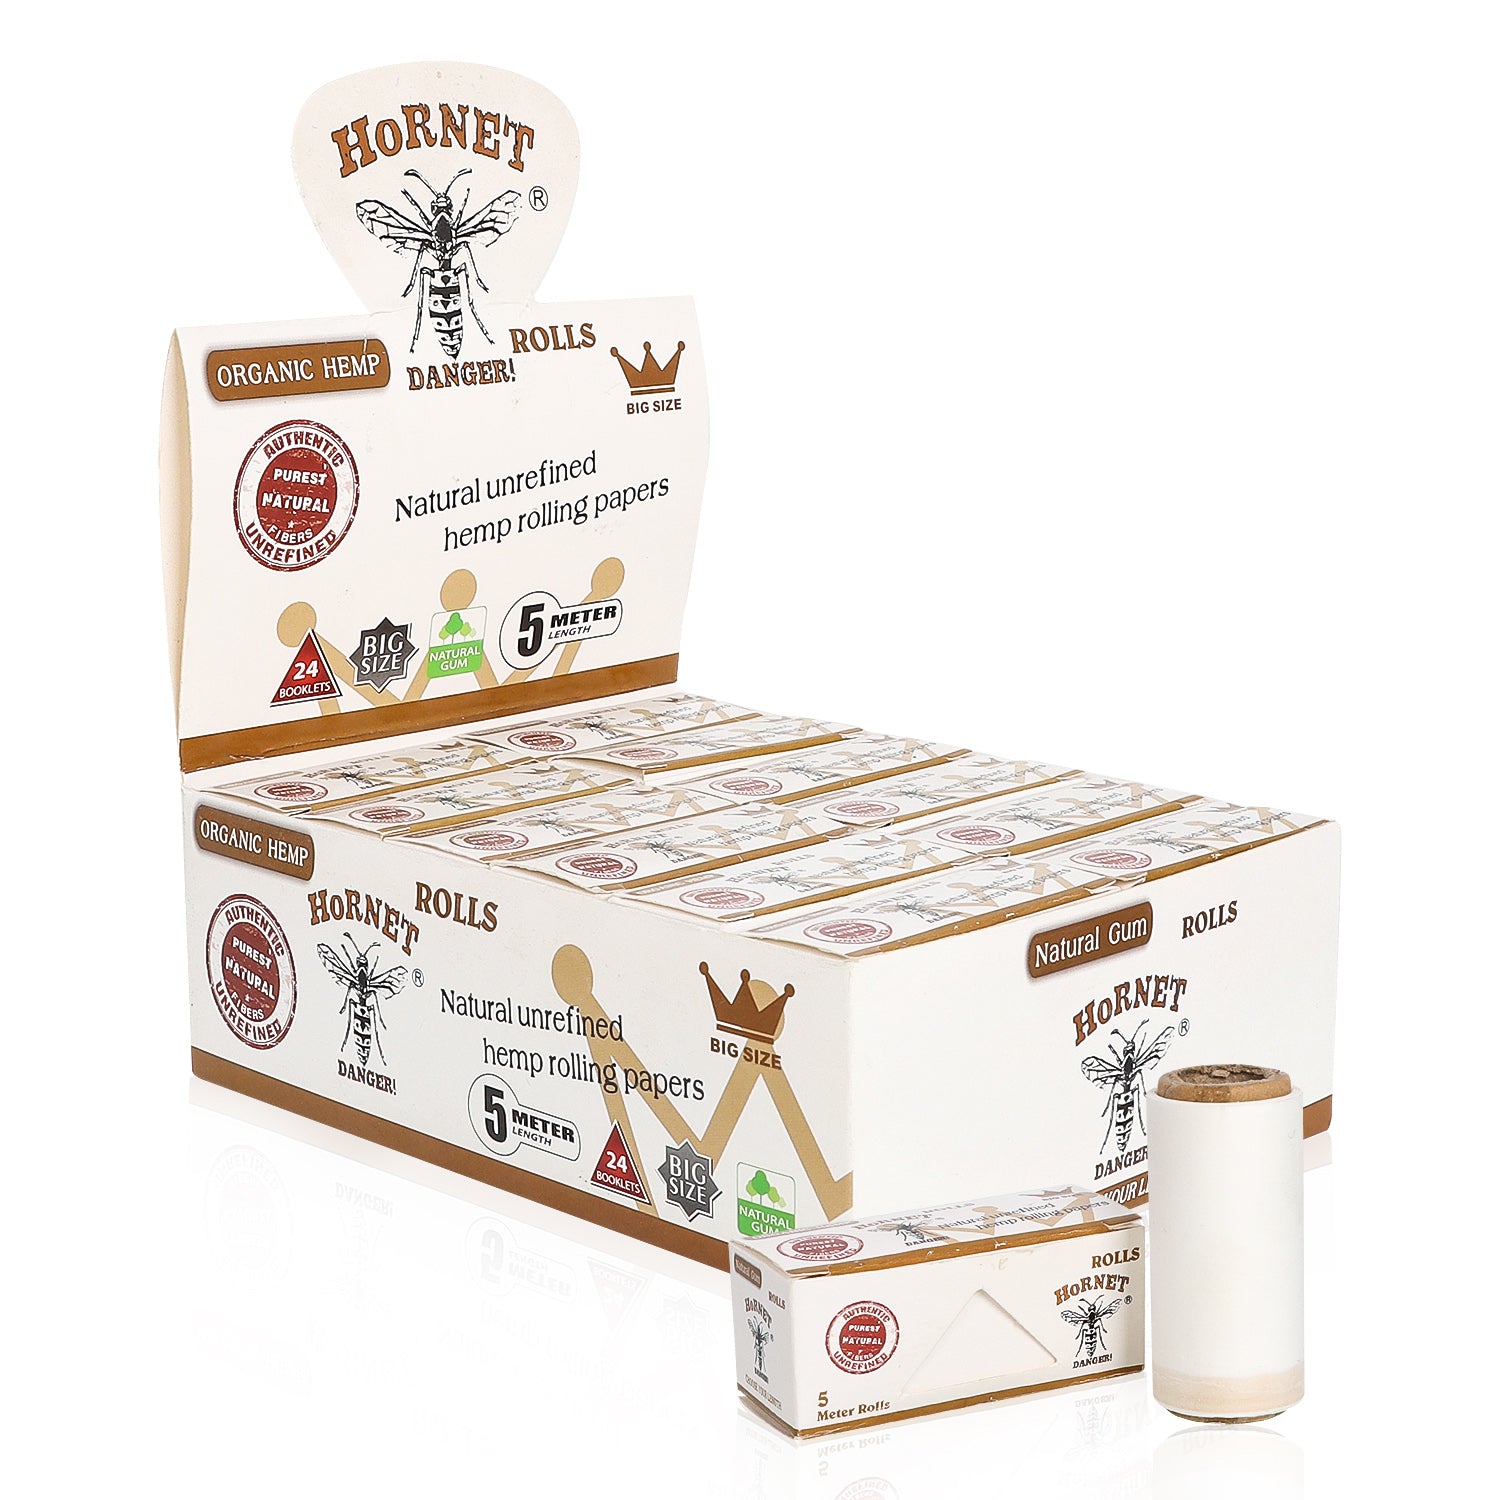 HORNET 5 m Free Rolling Papers, Organic White Rolling Paper, 24 PCS / Box